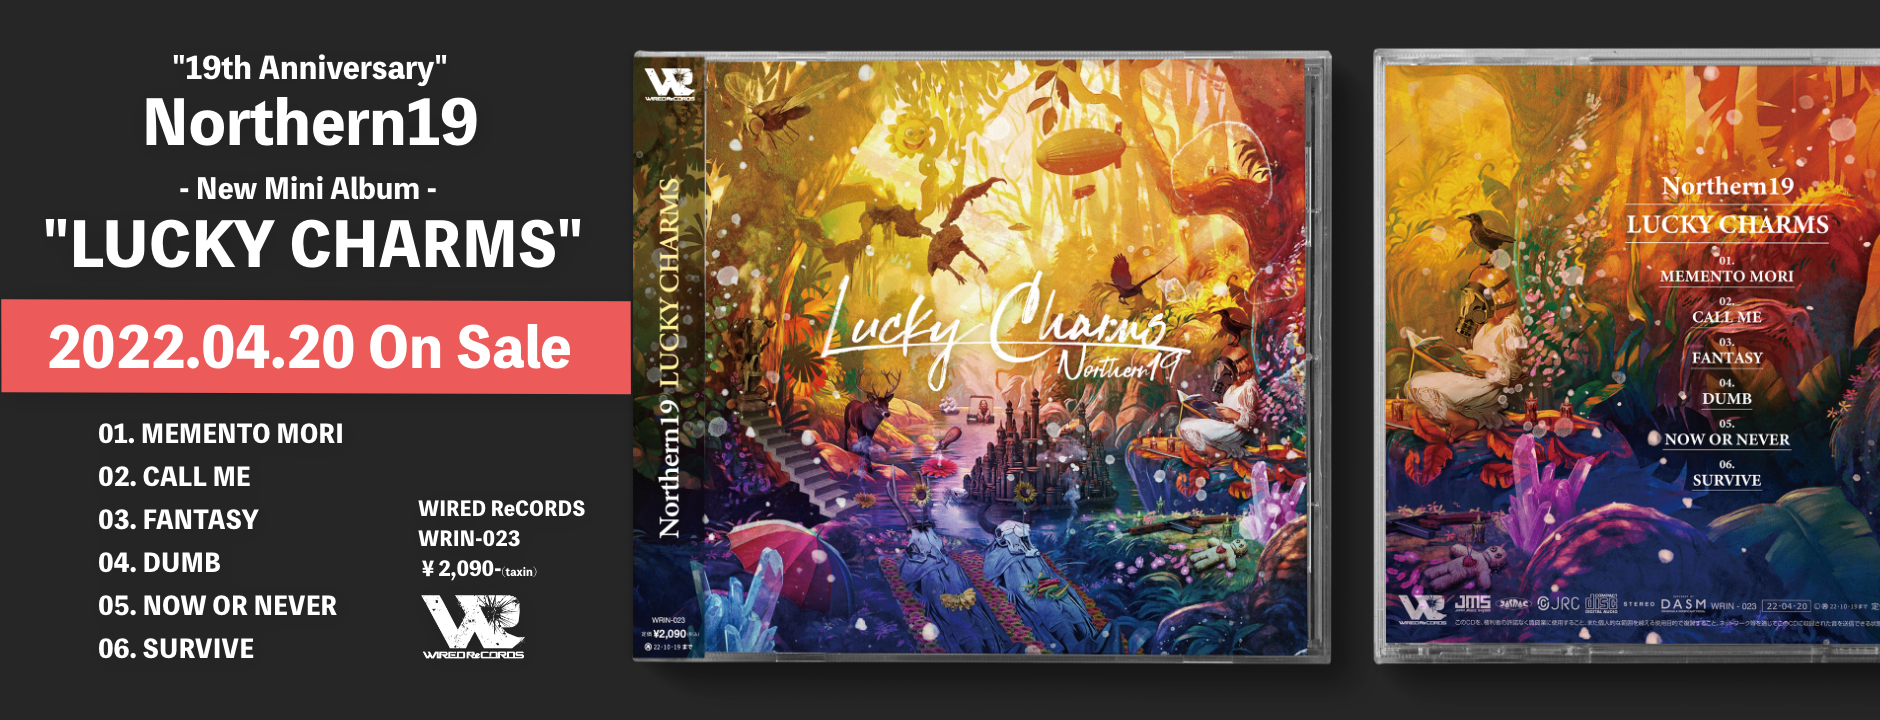 Northern19 New Mini album LUCKY CHARMS